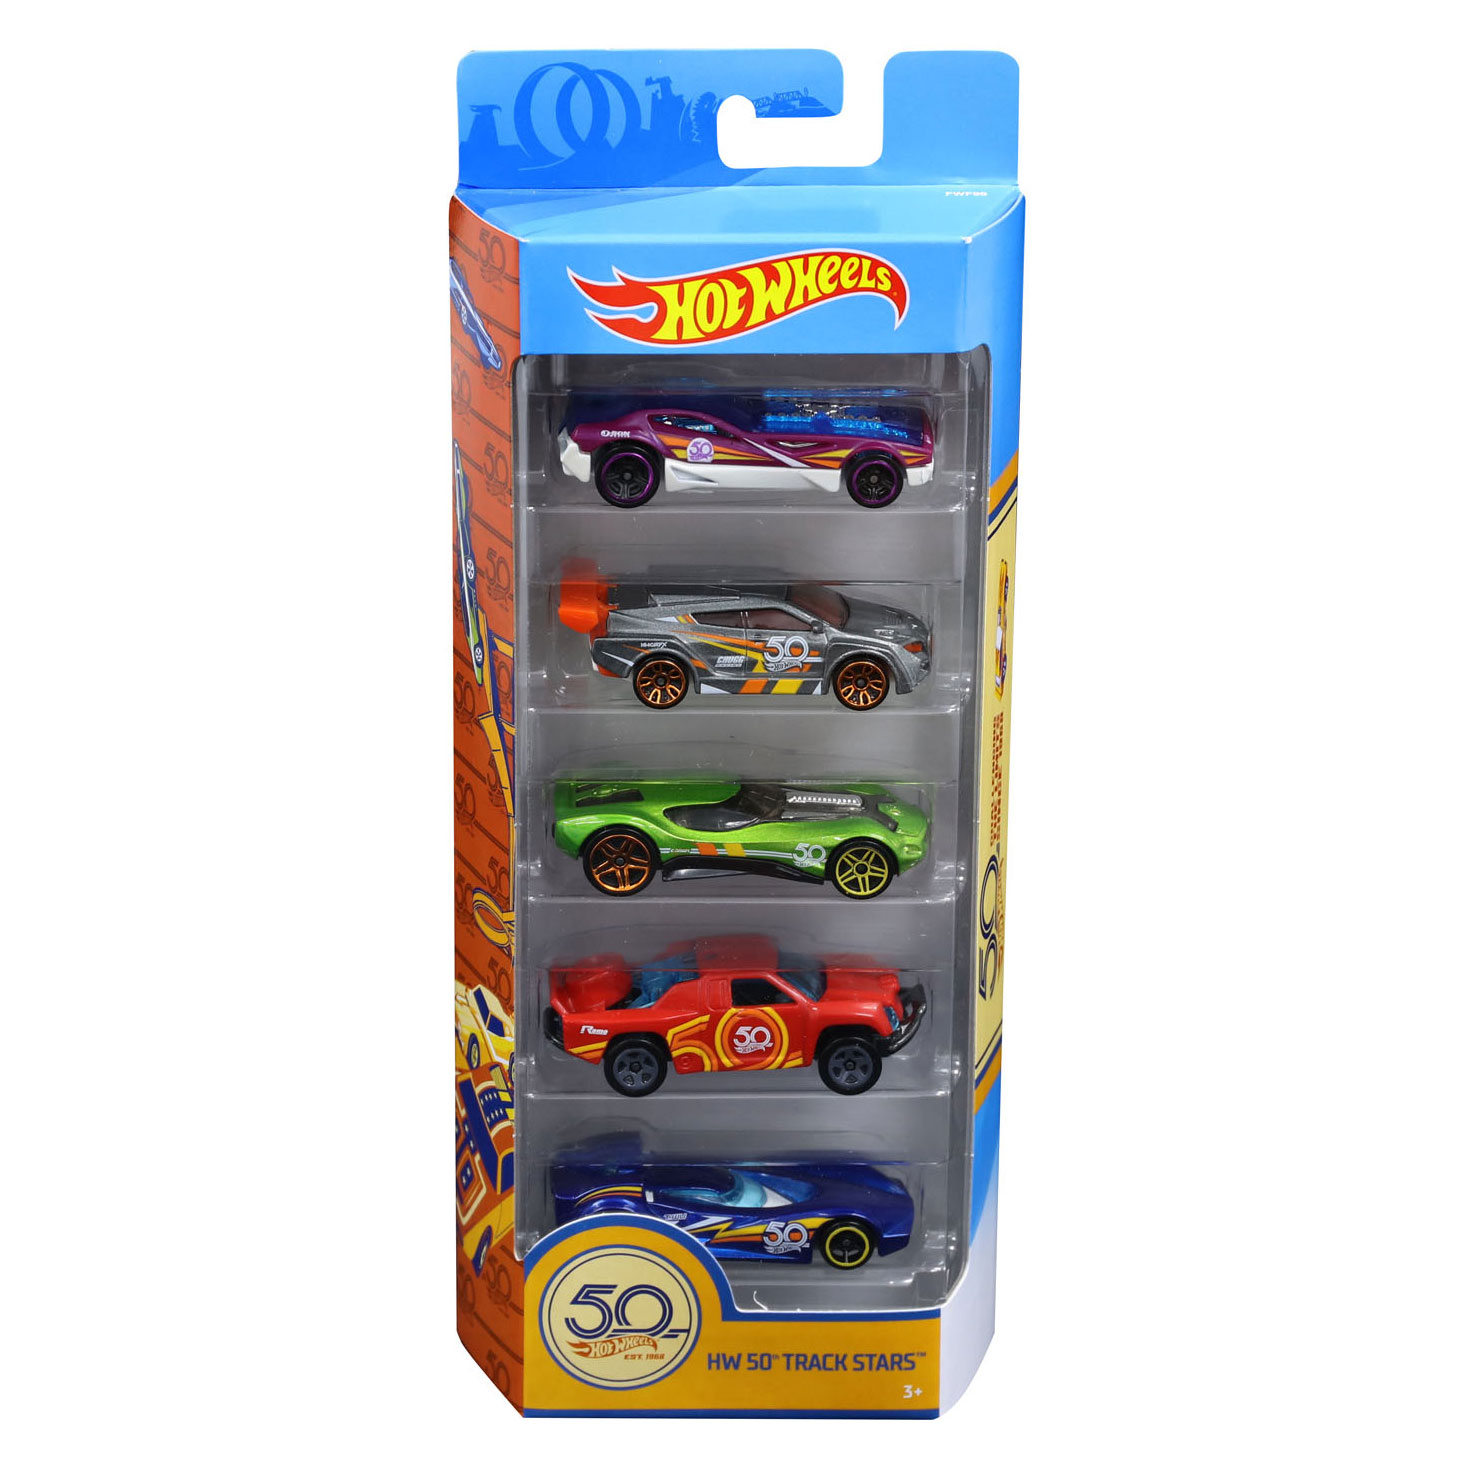  Hot Wheels Sanrio Character Car 5-Pack, Toy Cars in 1